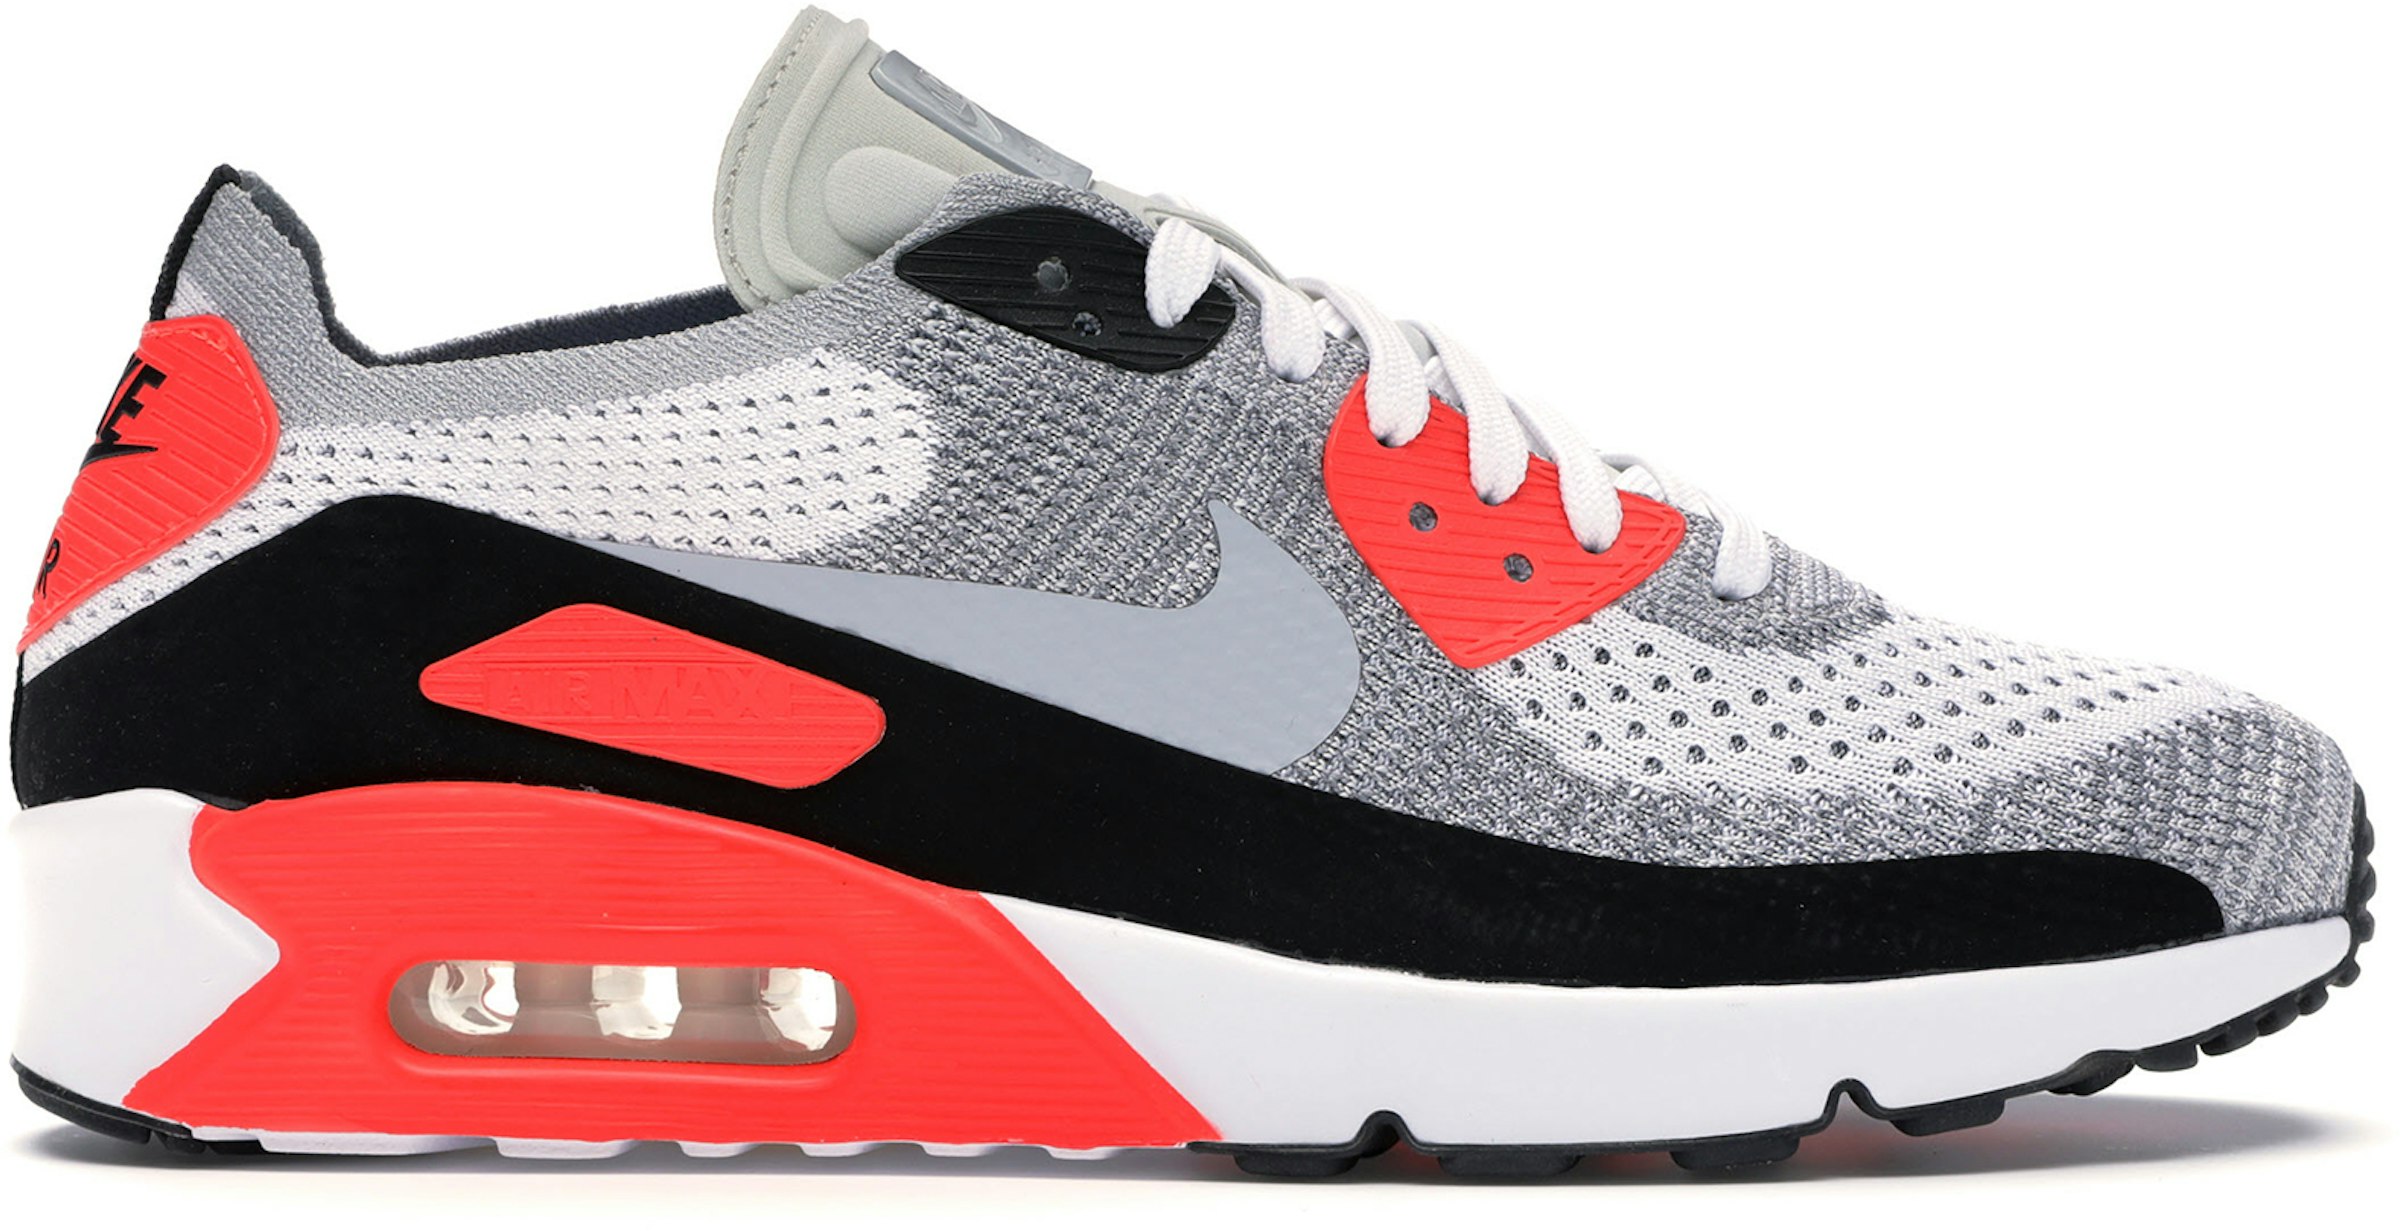 Air Max 90 Ultra Flyknit 2.0 Infrared - 875943-100 - US